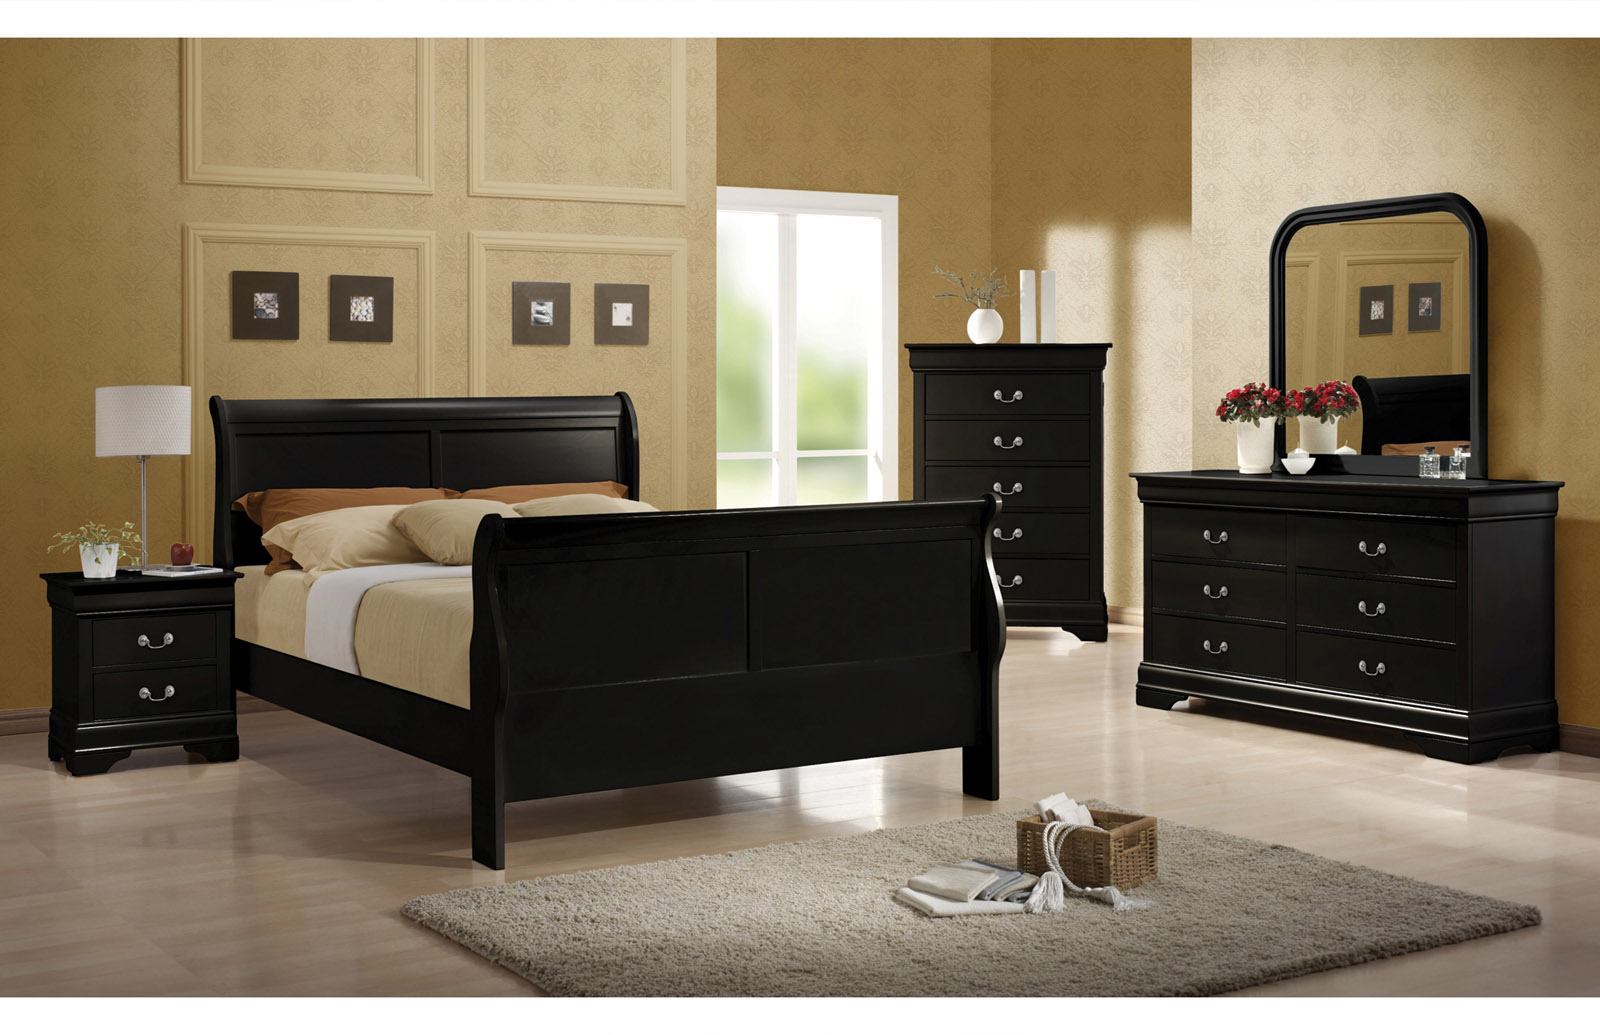 Drop Dead Gorgeous Images Of Bedroom Furniture Sets Assembled Rustic in sizing 1600 X 1035